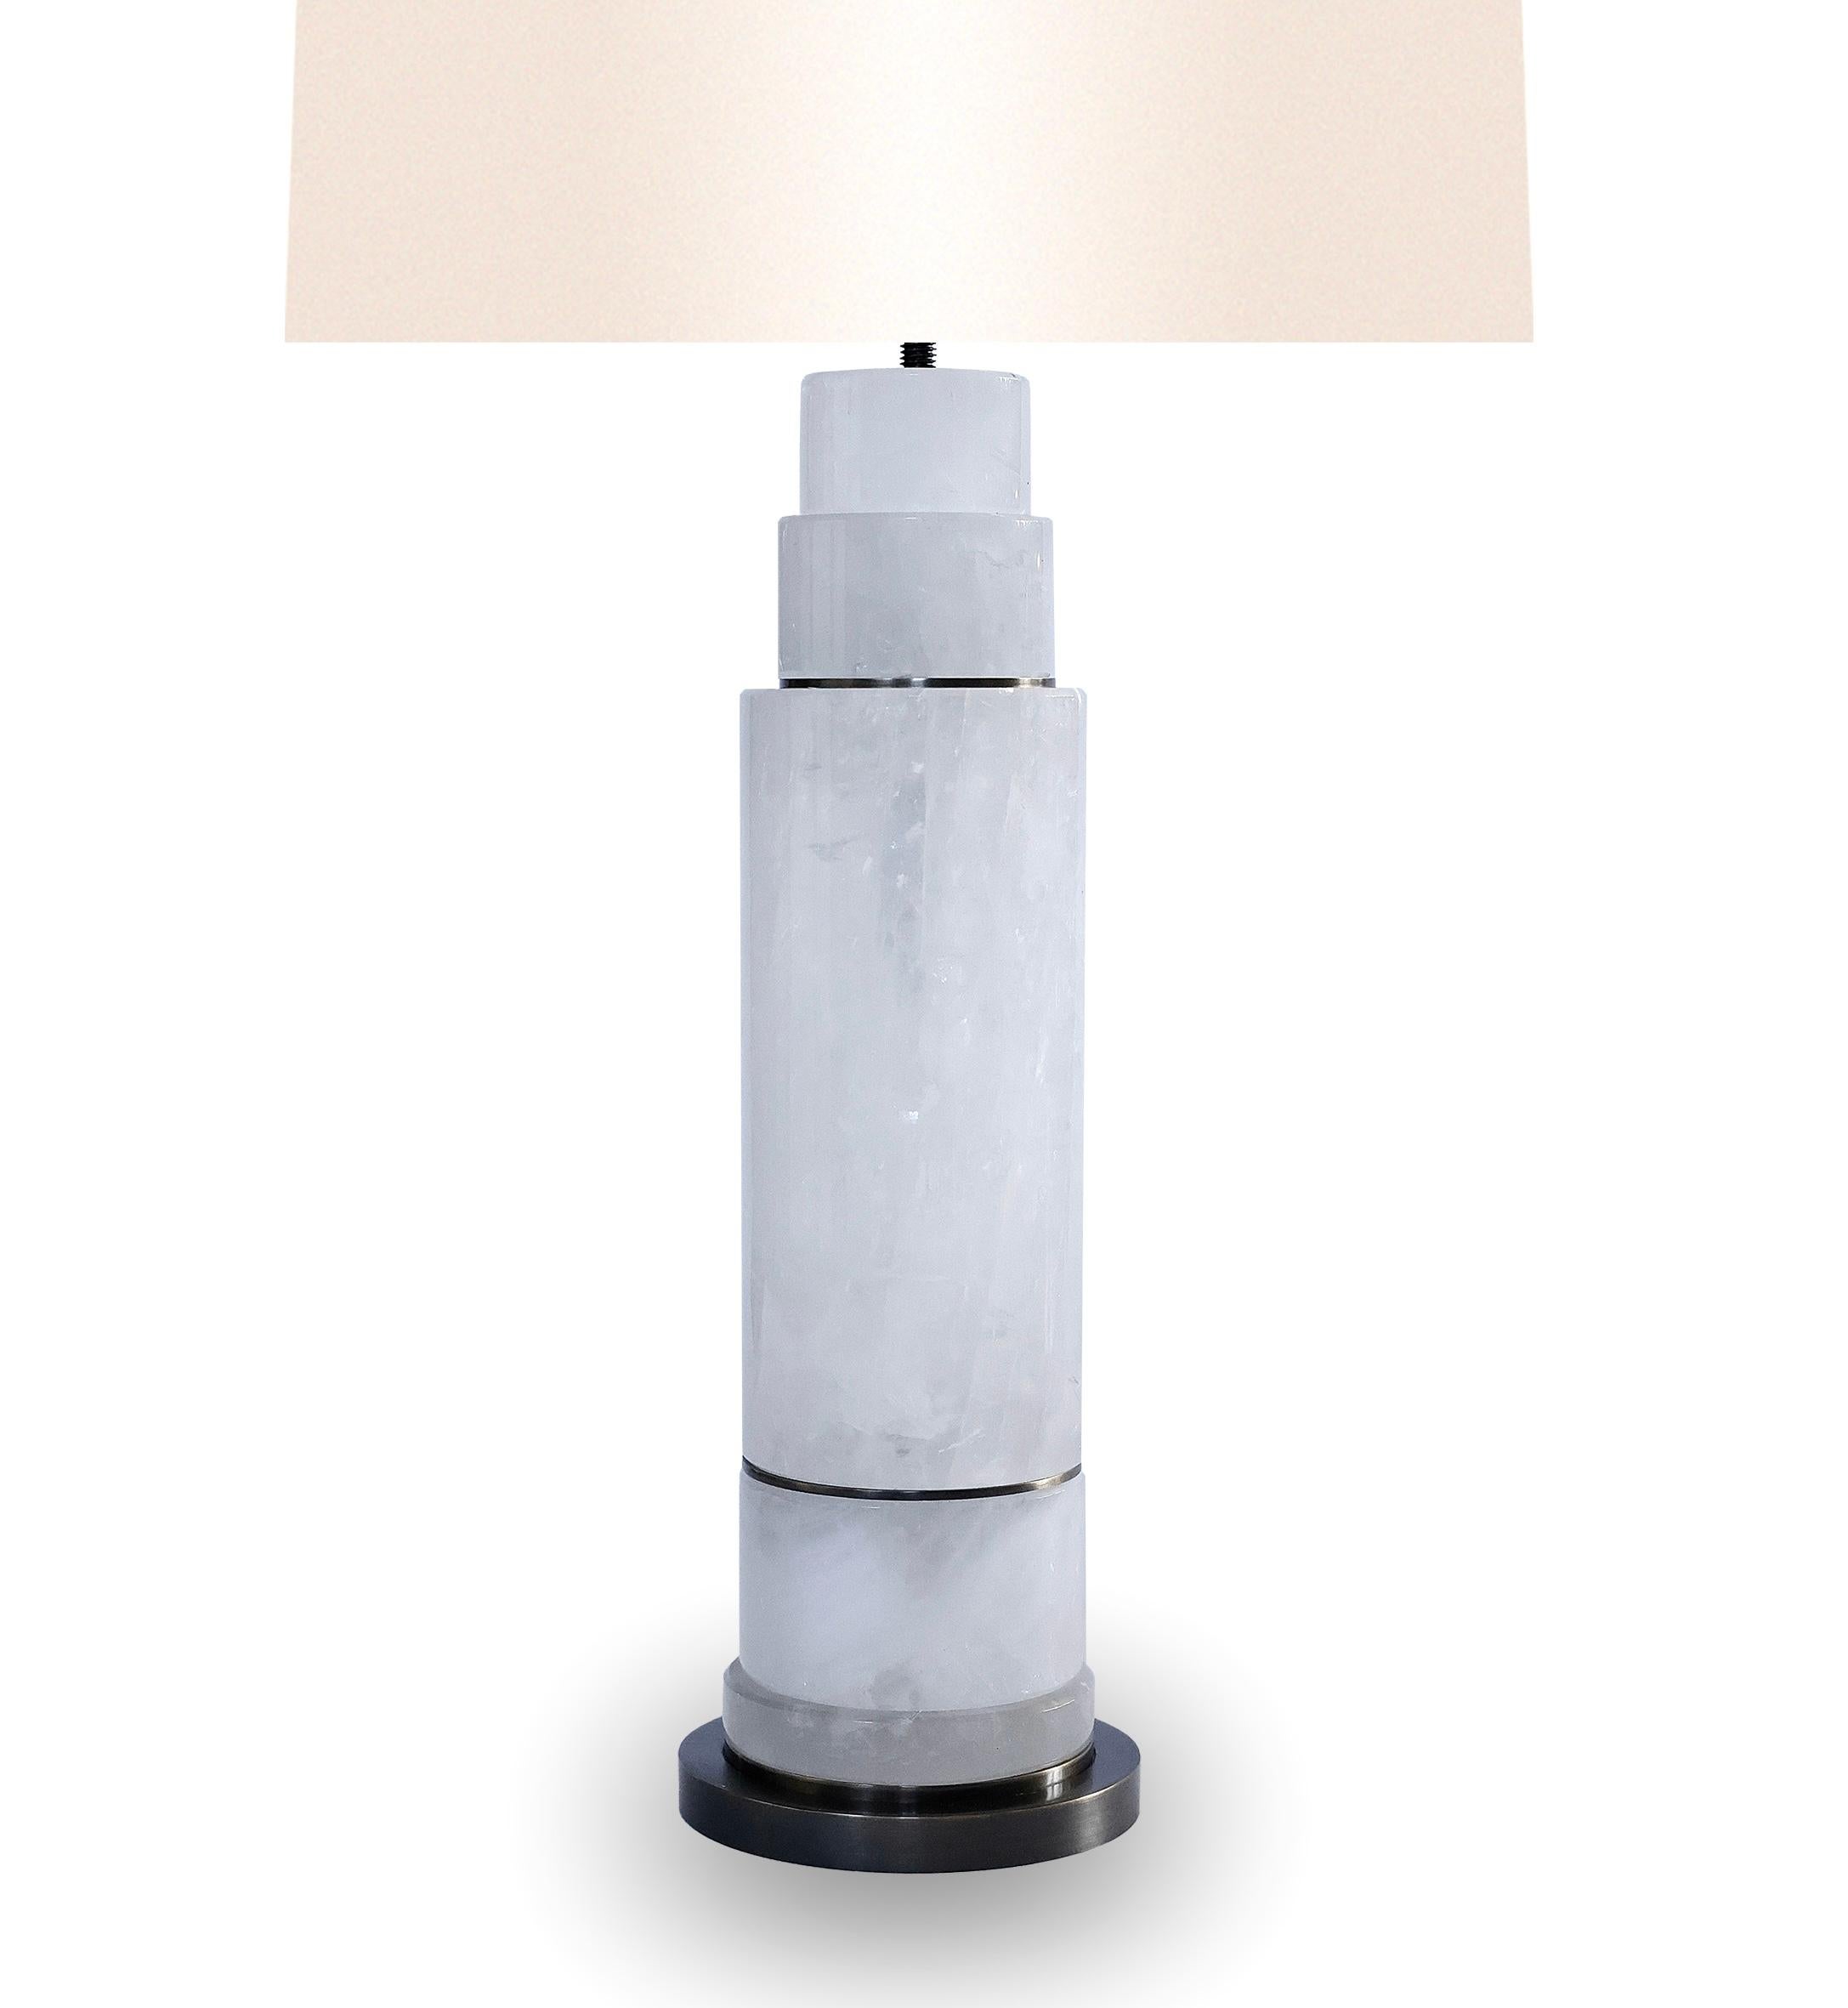 Pair of sectional column rock crystal lamps with aged 
brass inserts and bases. Created by Phoenix Gallery, NYC.
To the top of rock crystal: 17”/H
(Lampshade not included.)